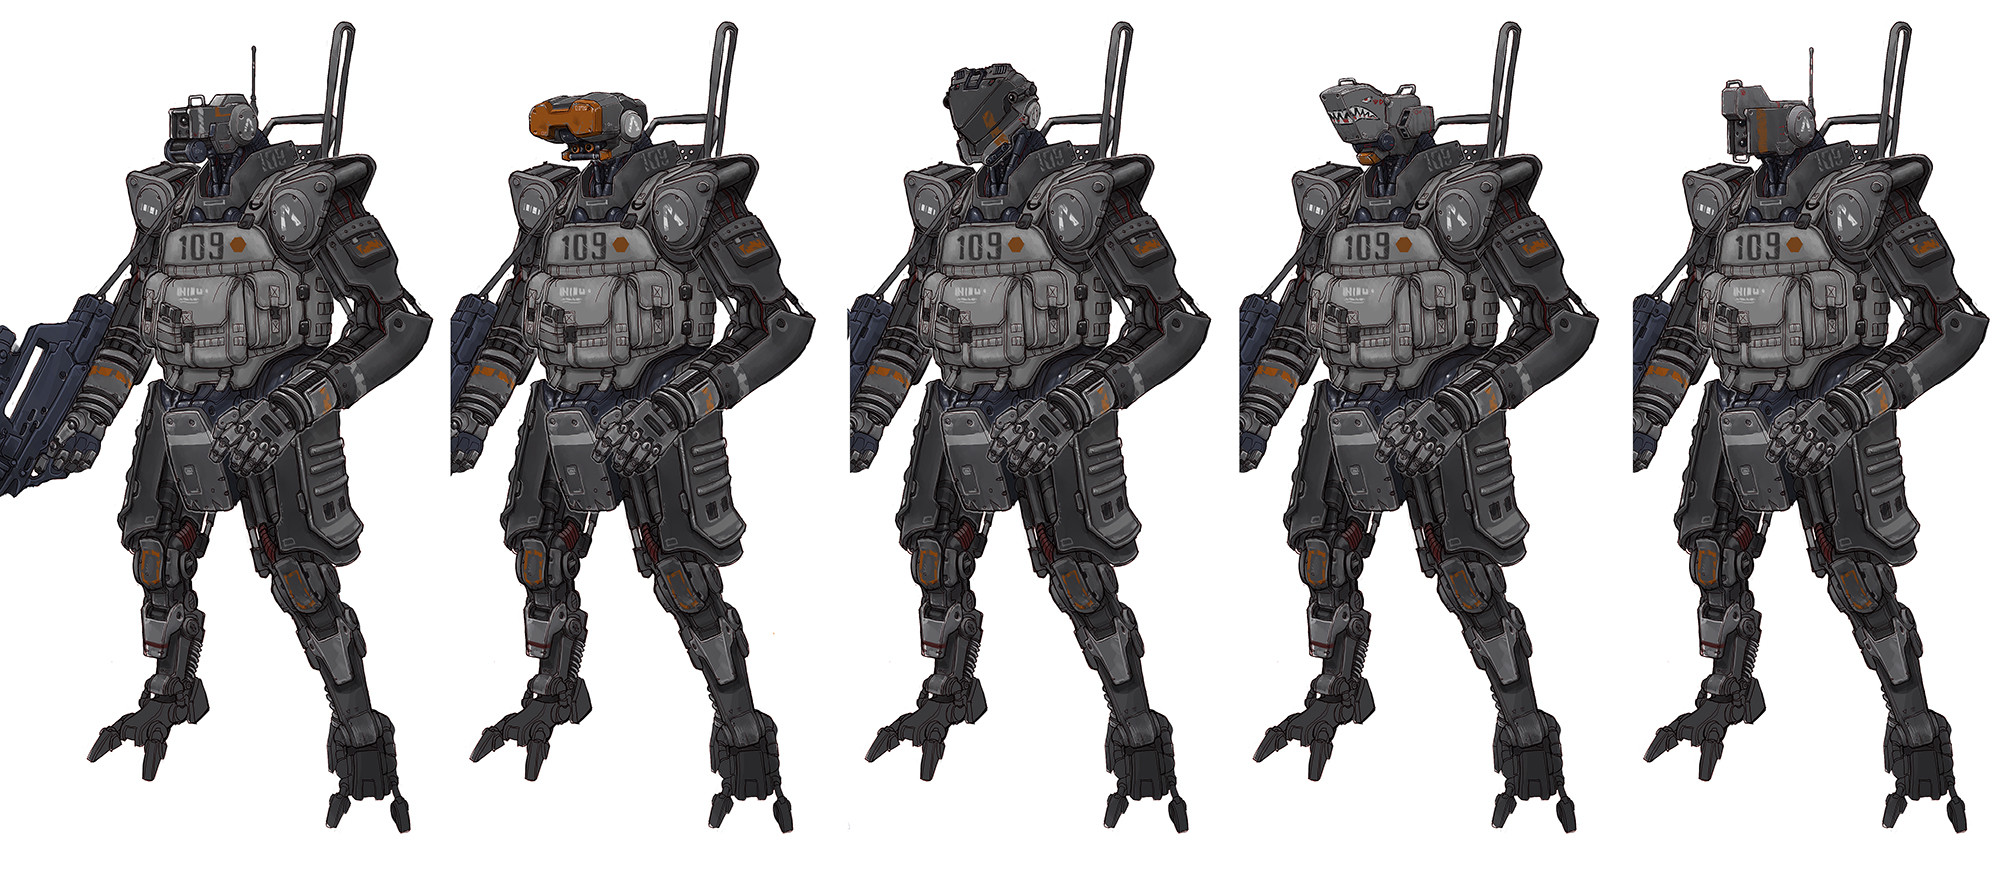 Kevin Anderson - Additional Titanfall 1 design work